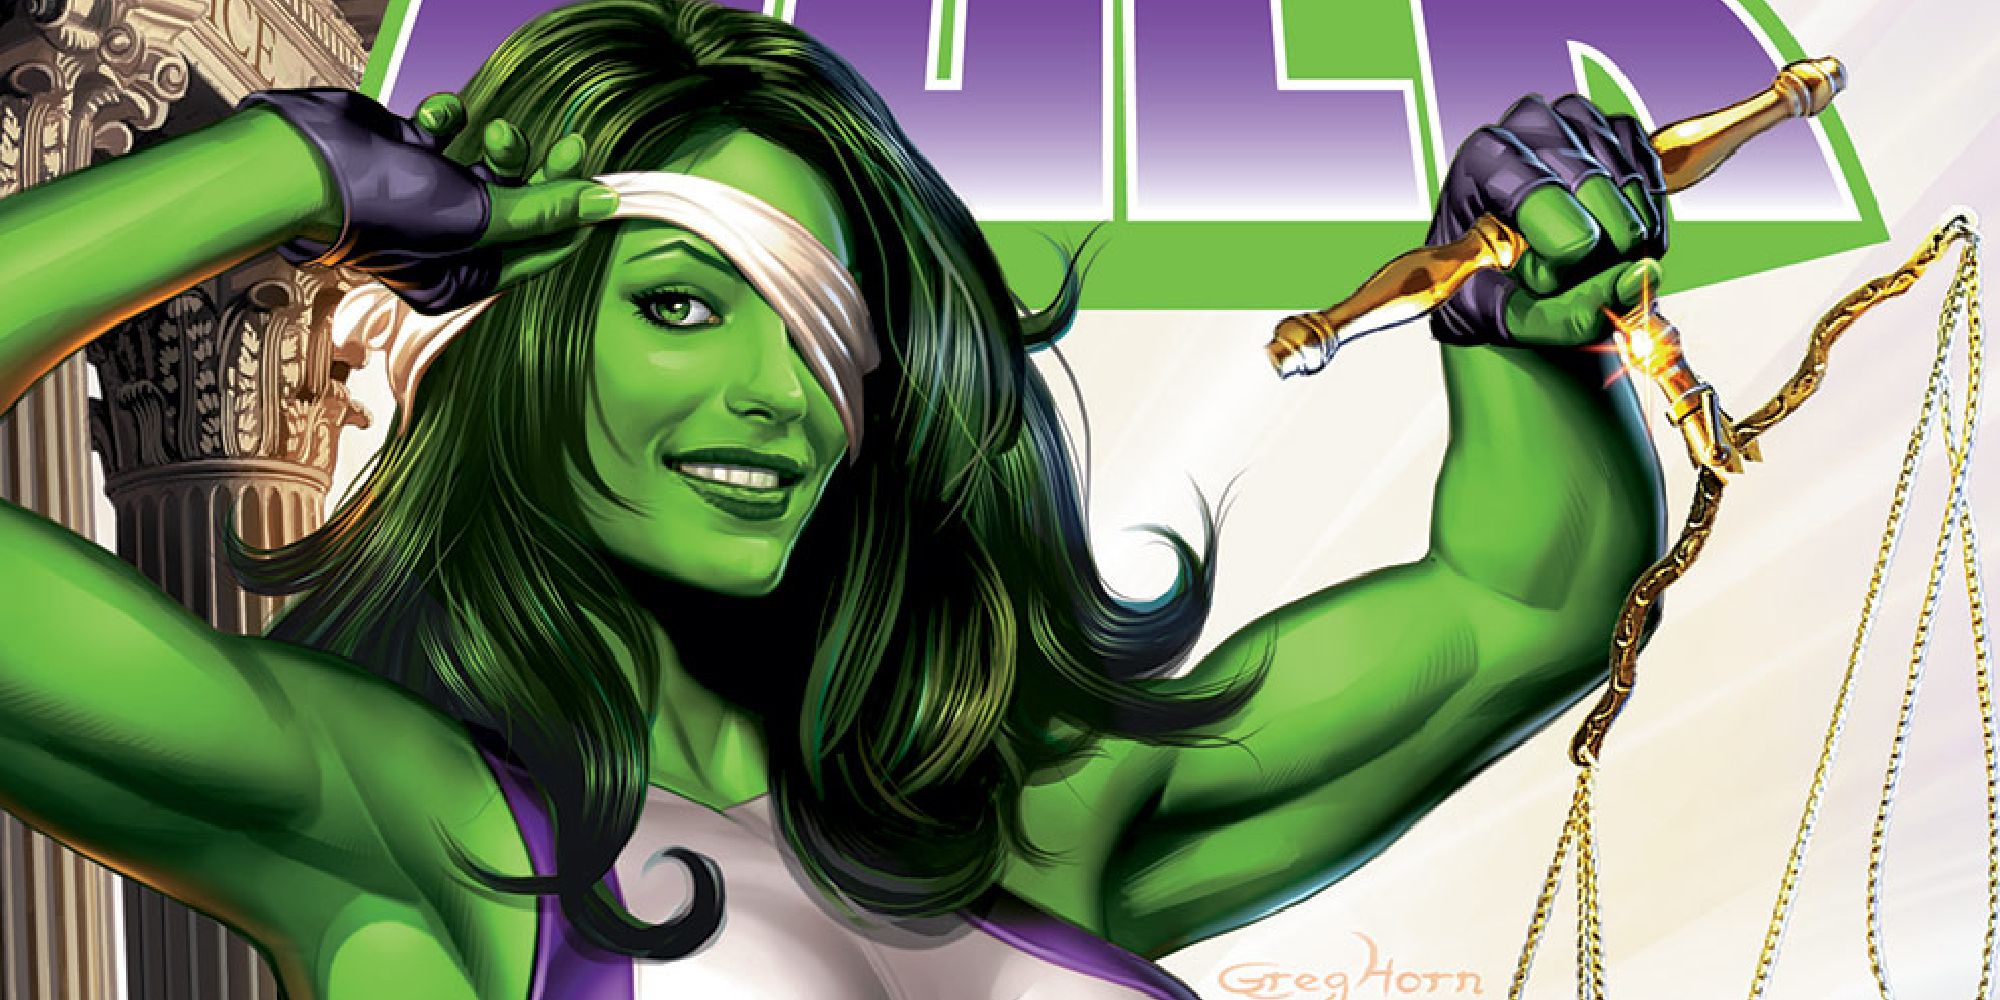 She-Hulk in her 2005 series cover with a blindfold and scales of justice